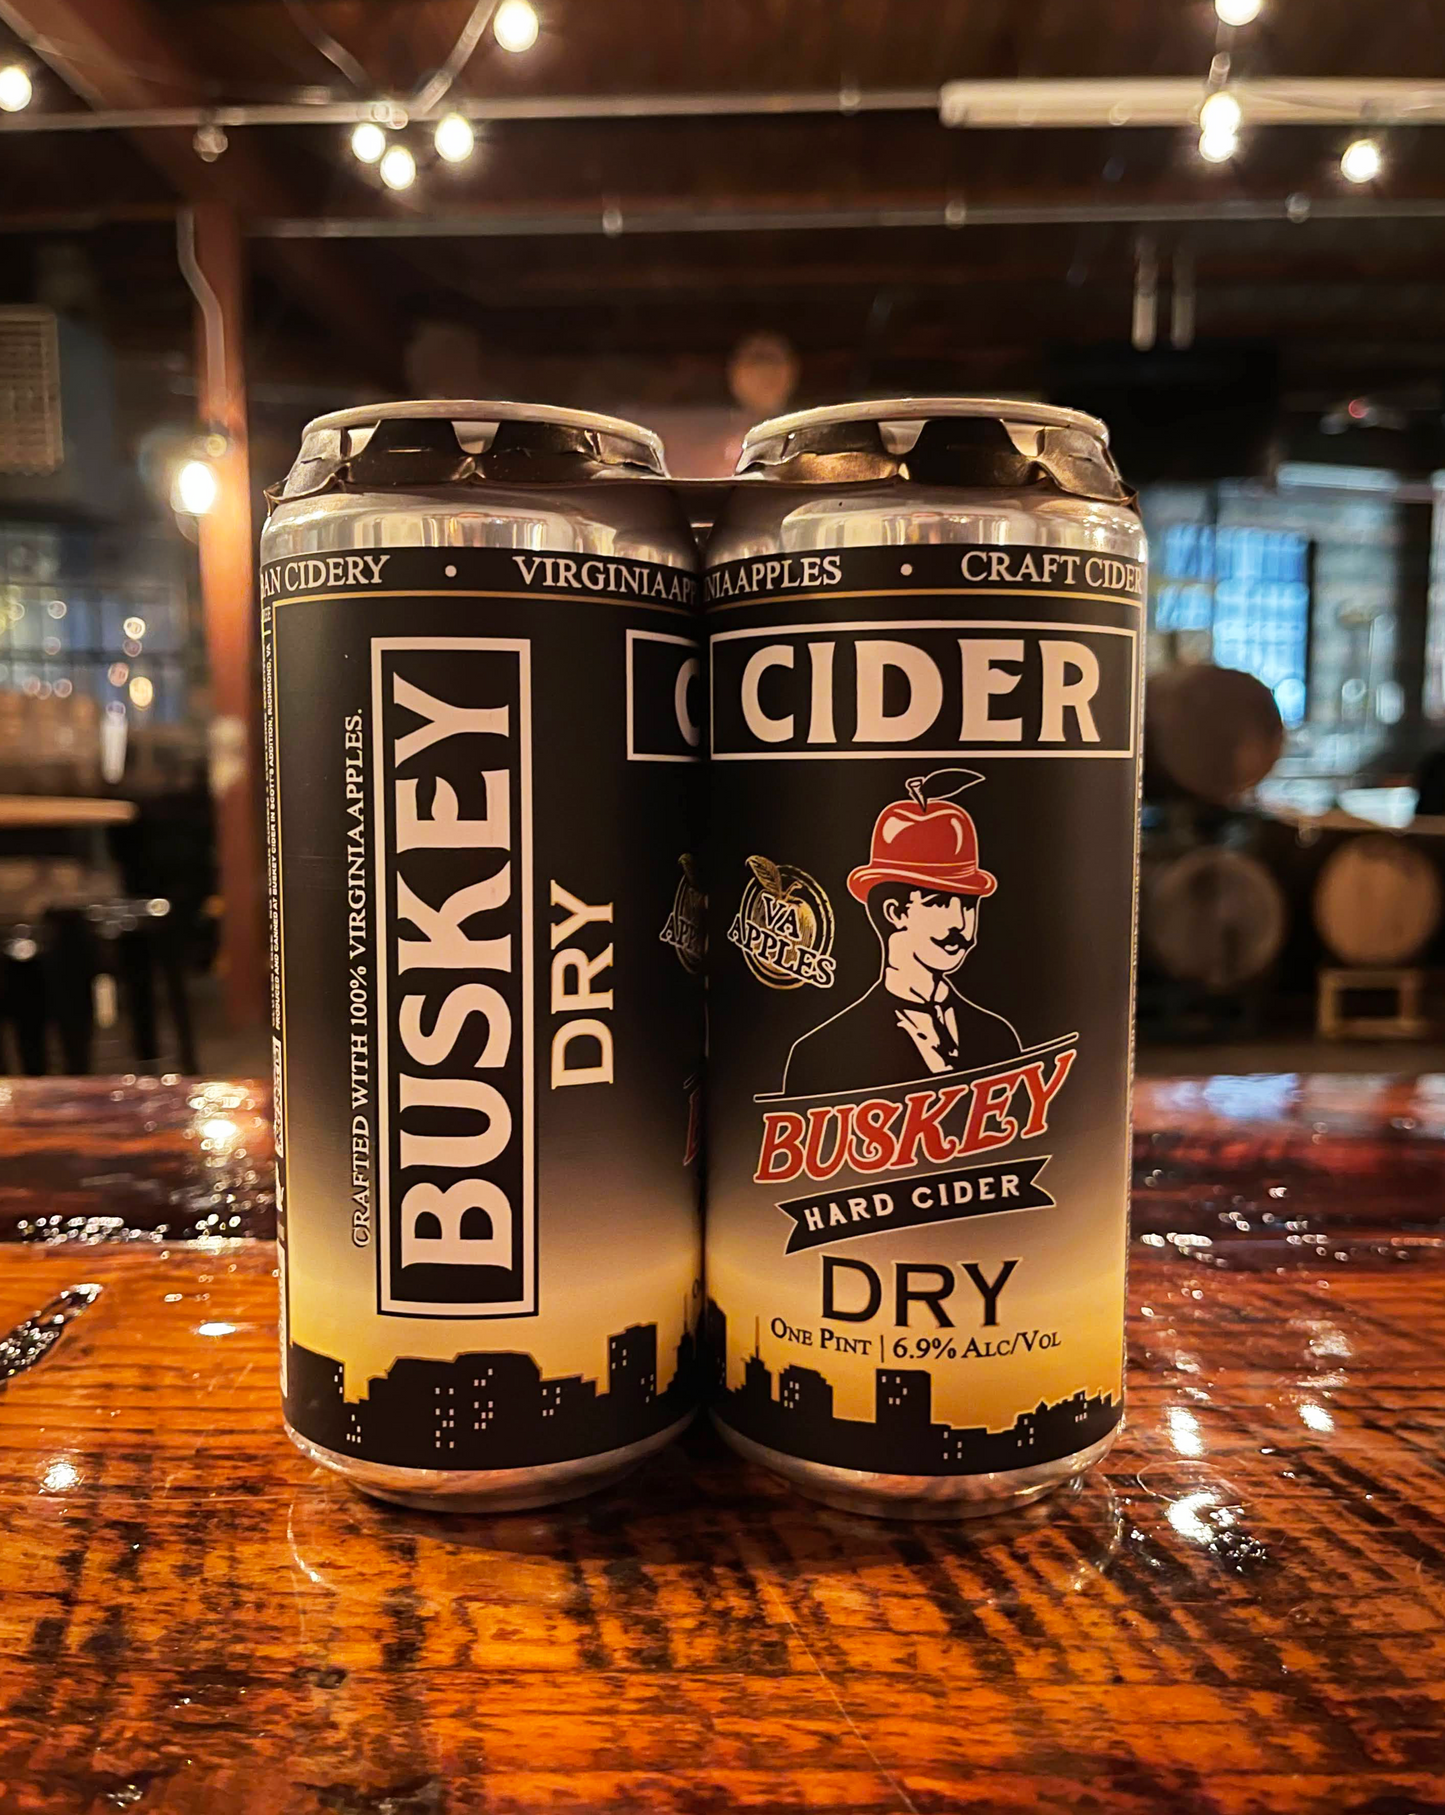 Buskey Dry Cider (4-Pack or Case)